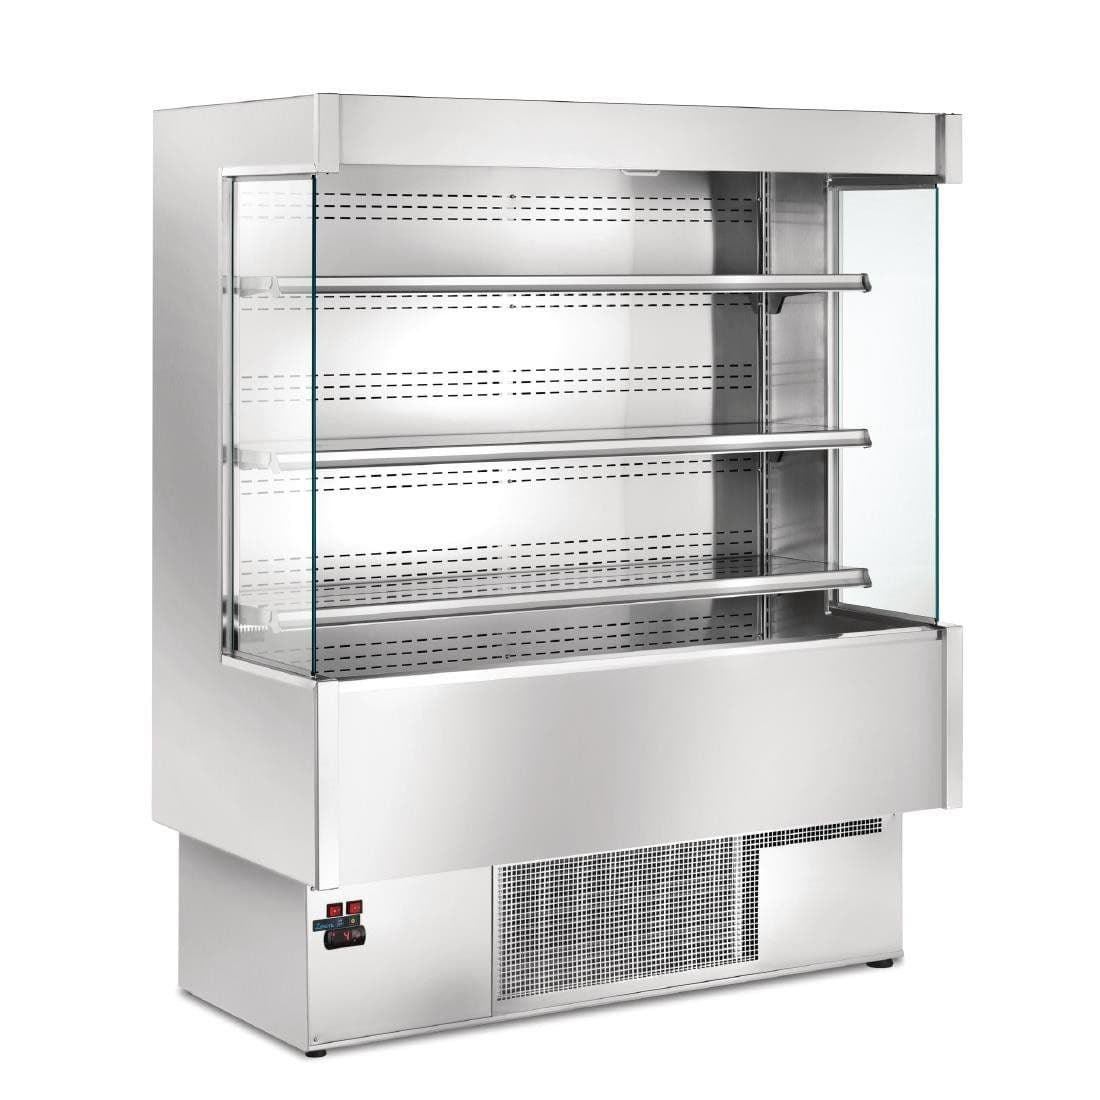 DE840-120 Zoin Silver SI Multi Deck Display Chiller 1200mm SI120B JD Catering Equipment Solutions Ltd